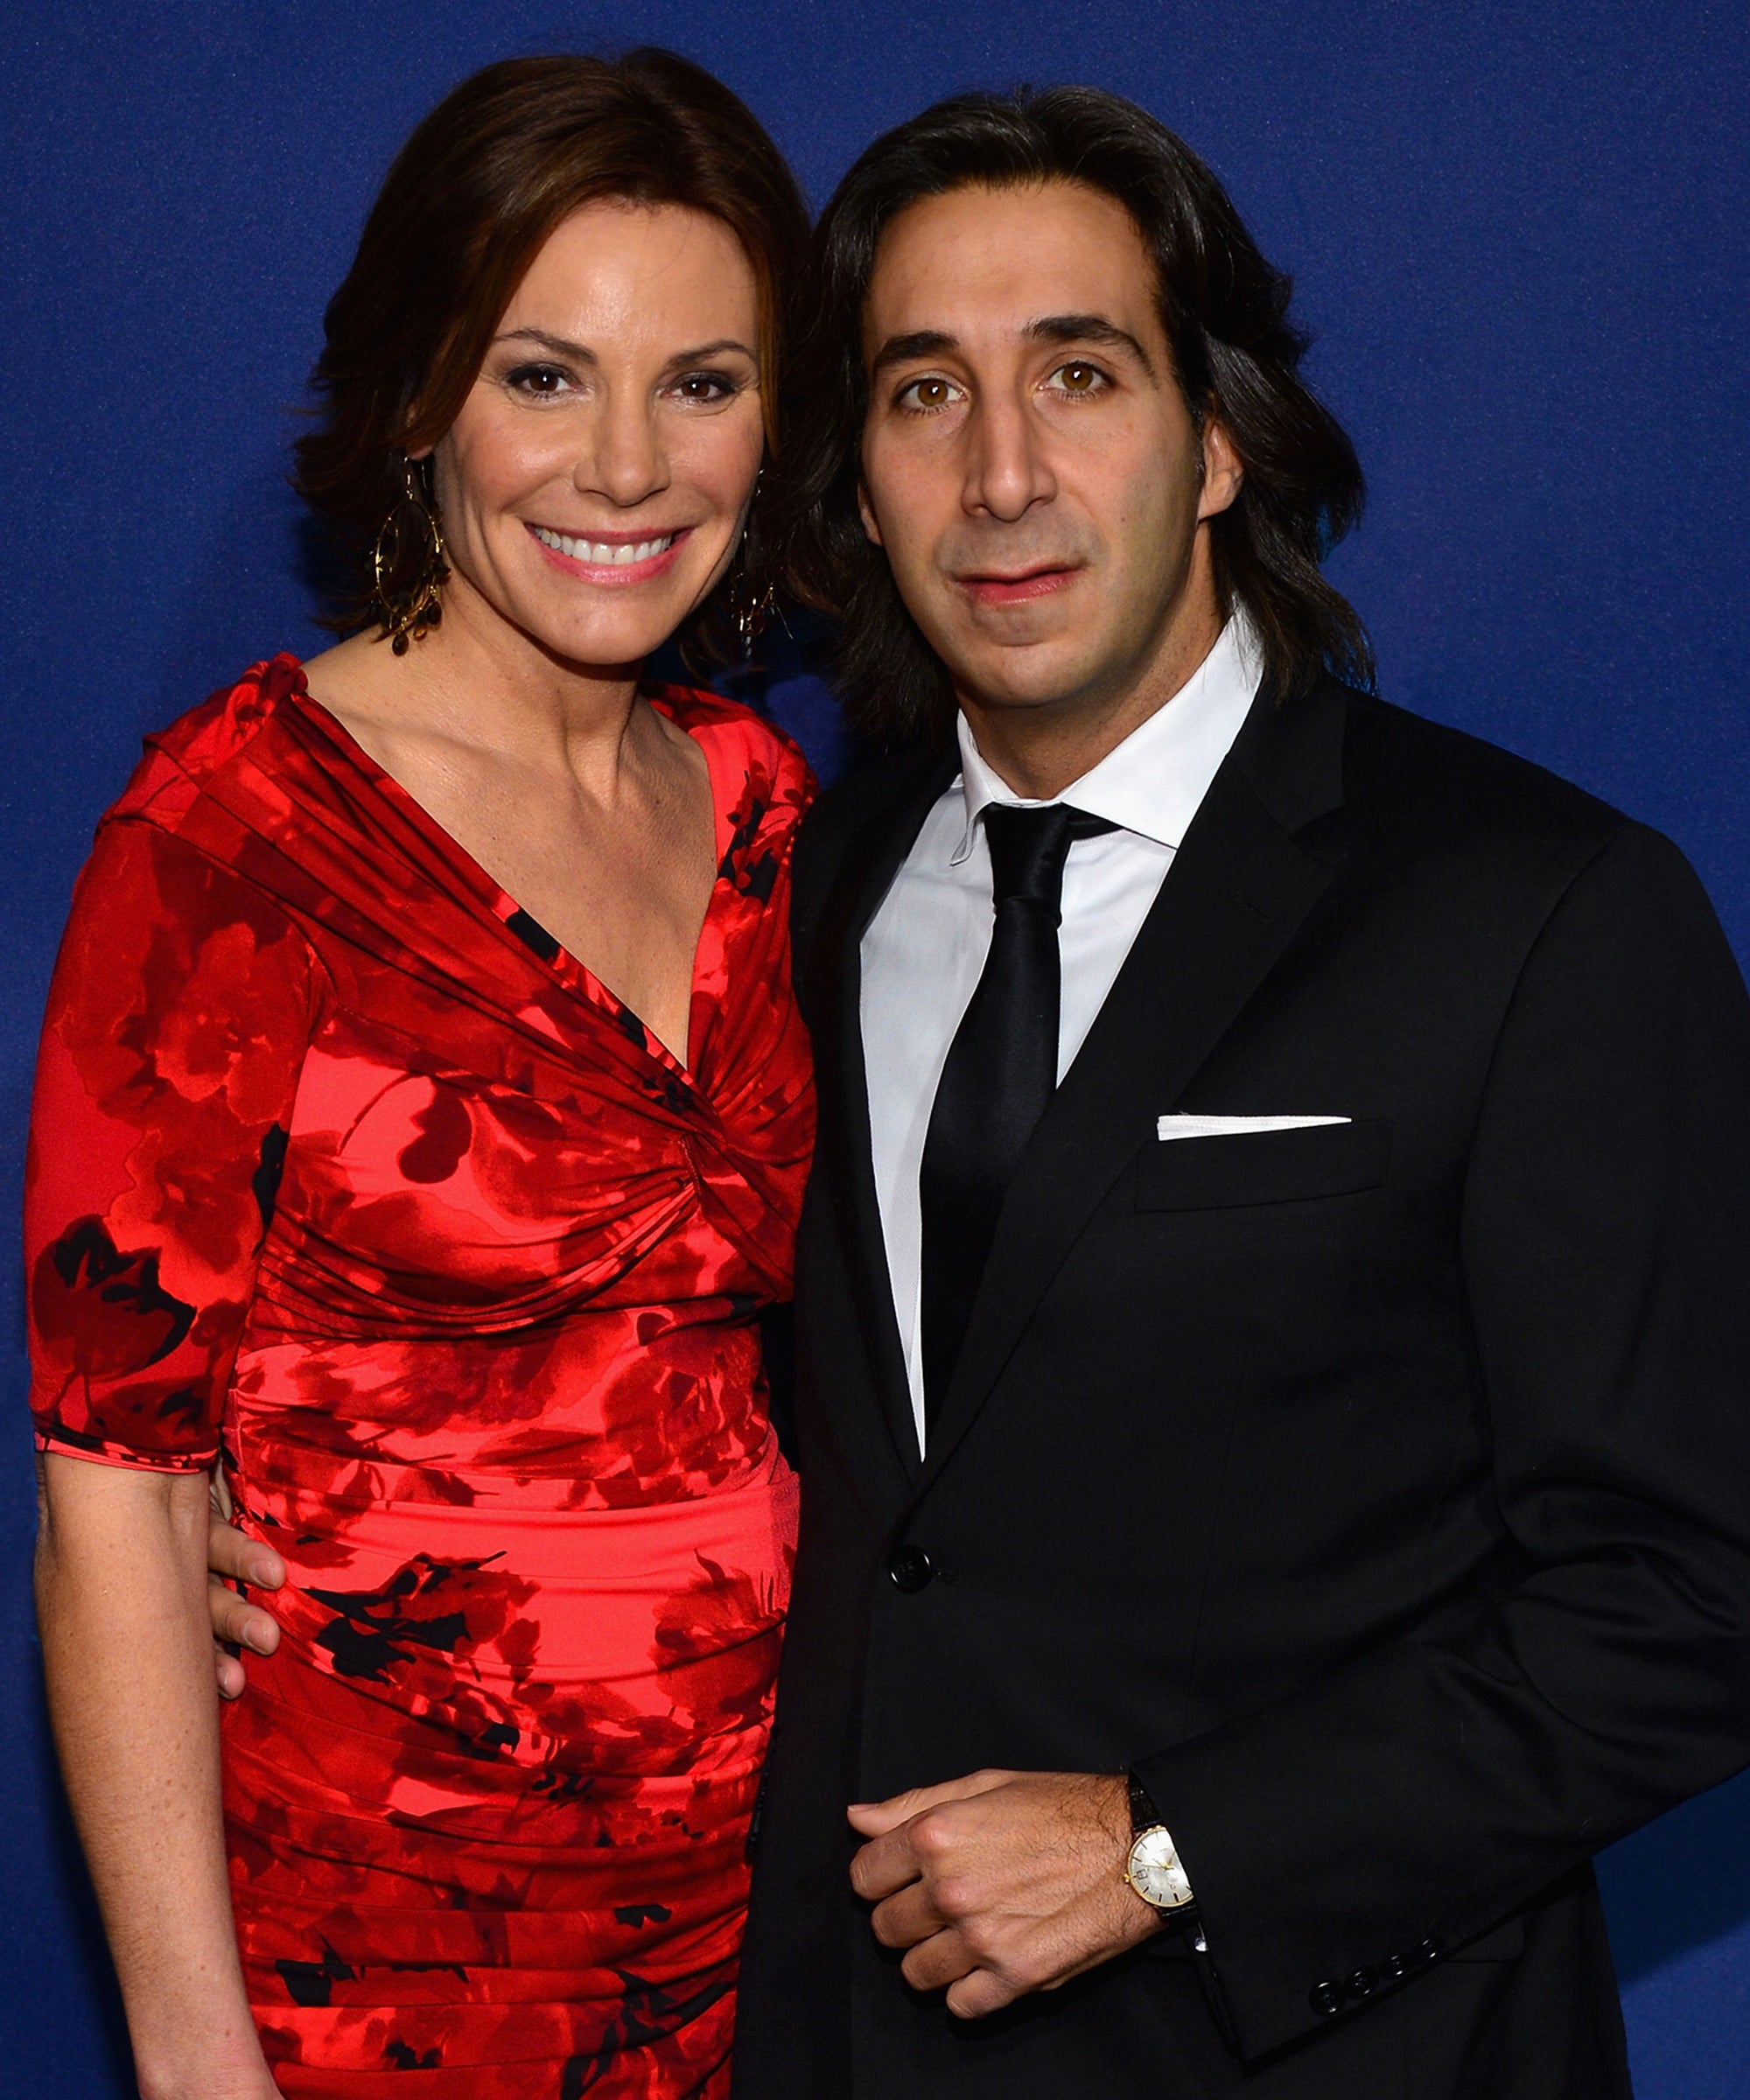 When Did Luann And Jacques Break Up On Real Housewives? photo pic